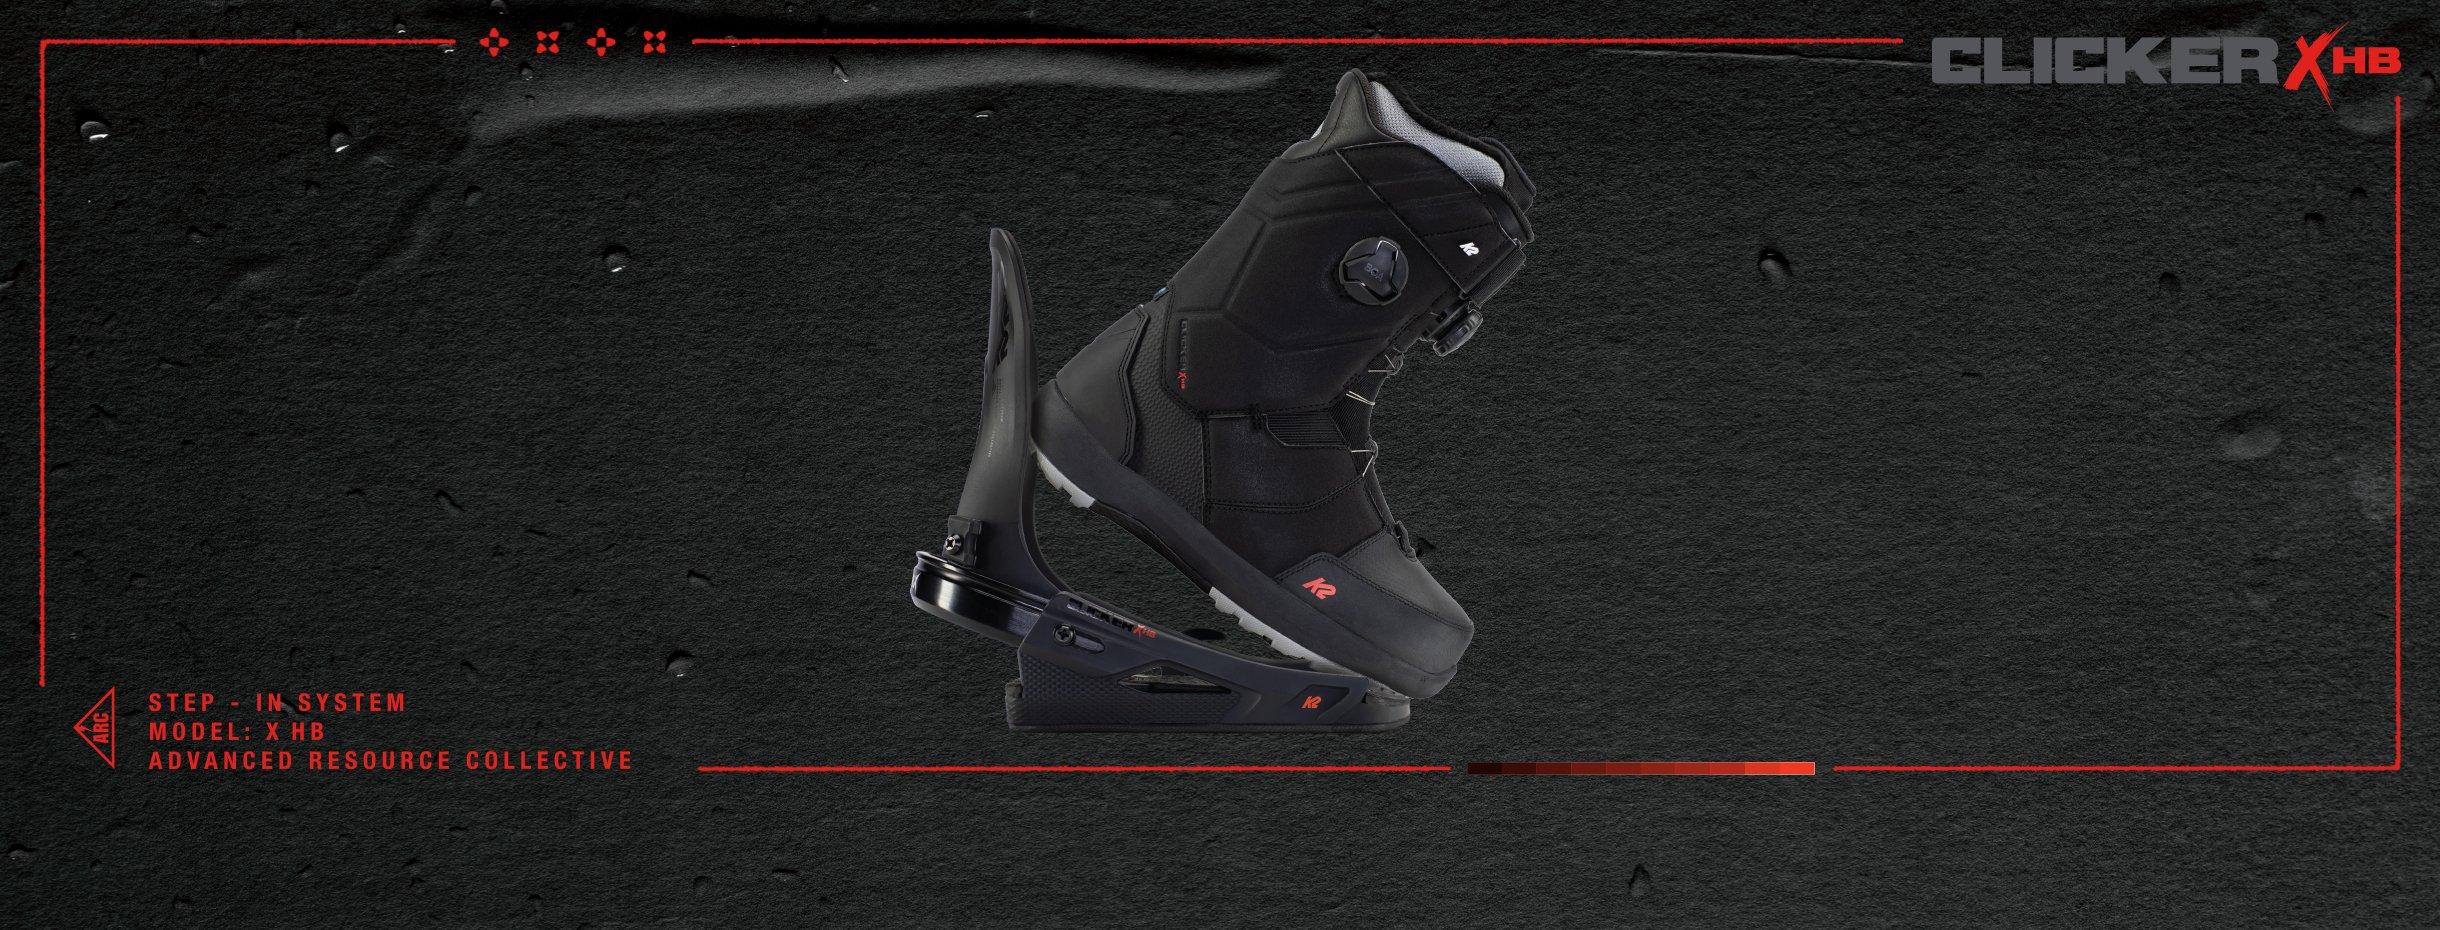 buggy board boots